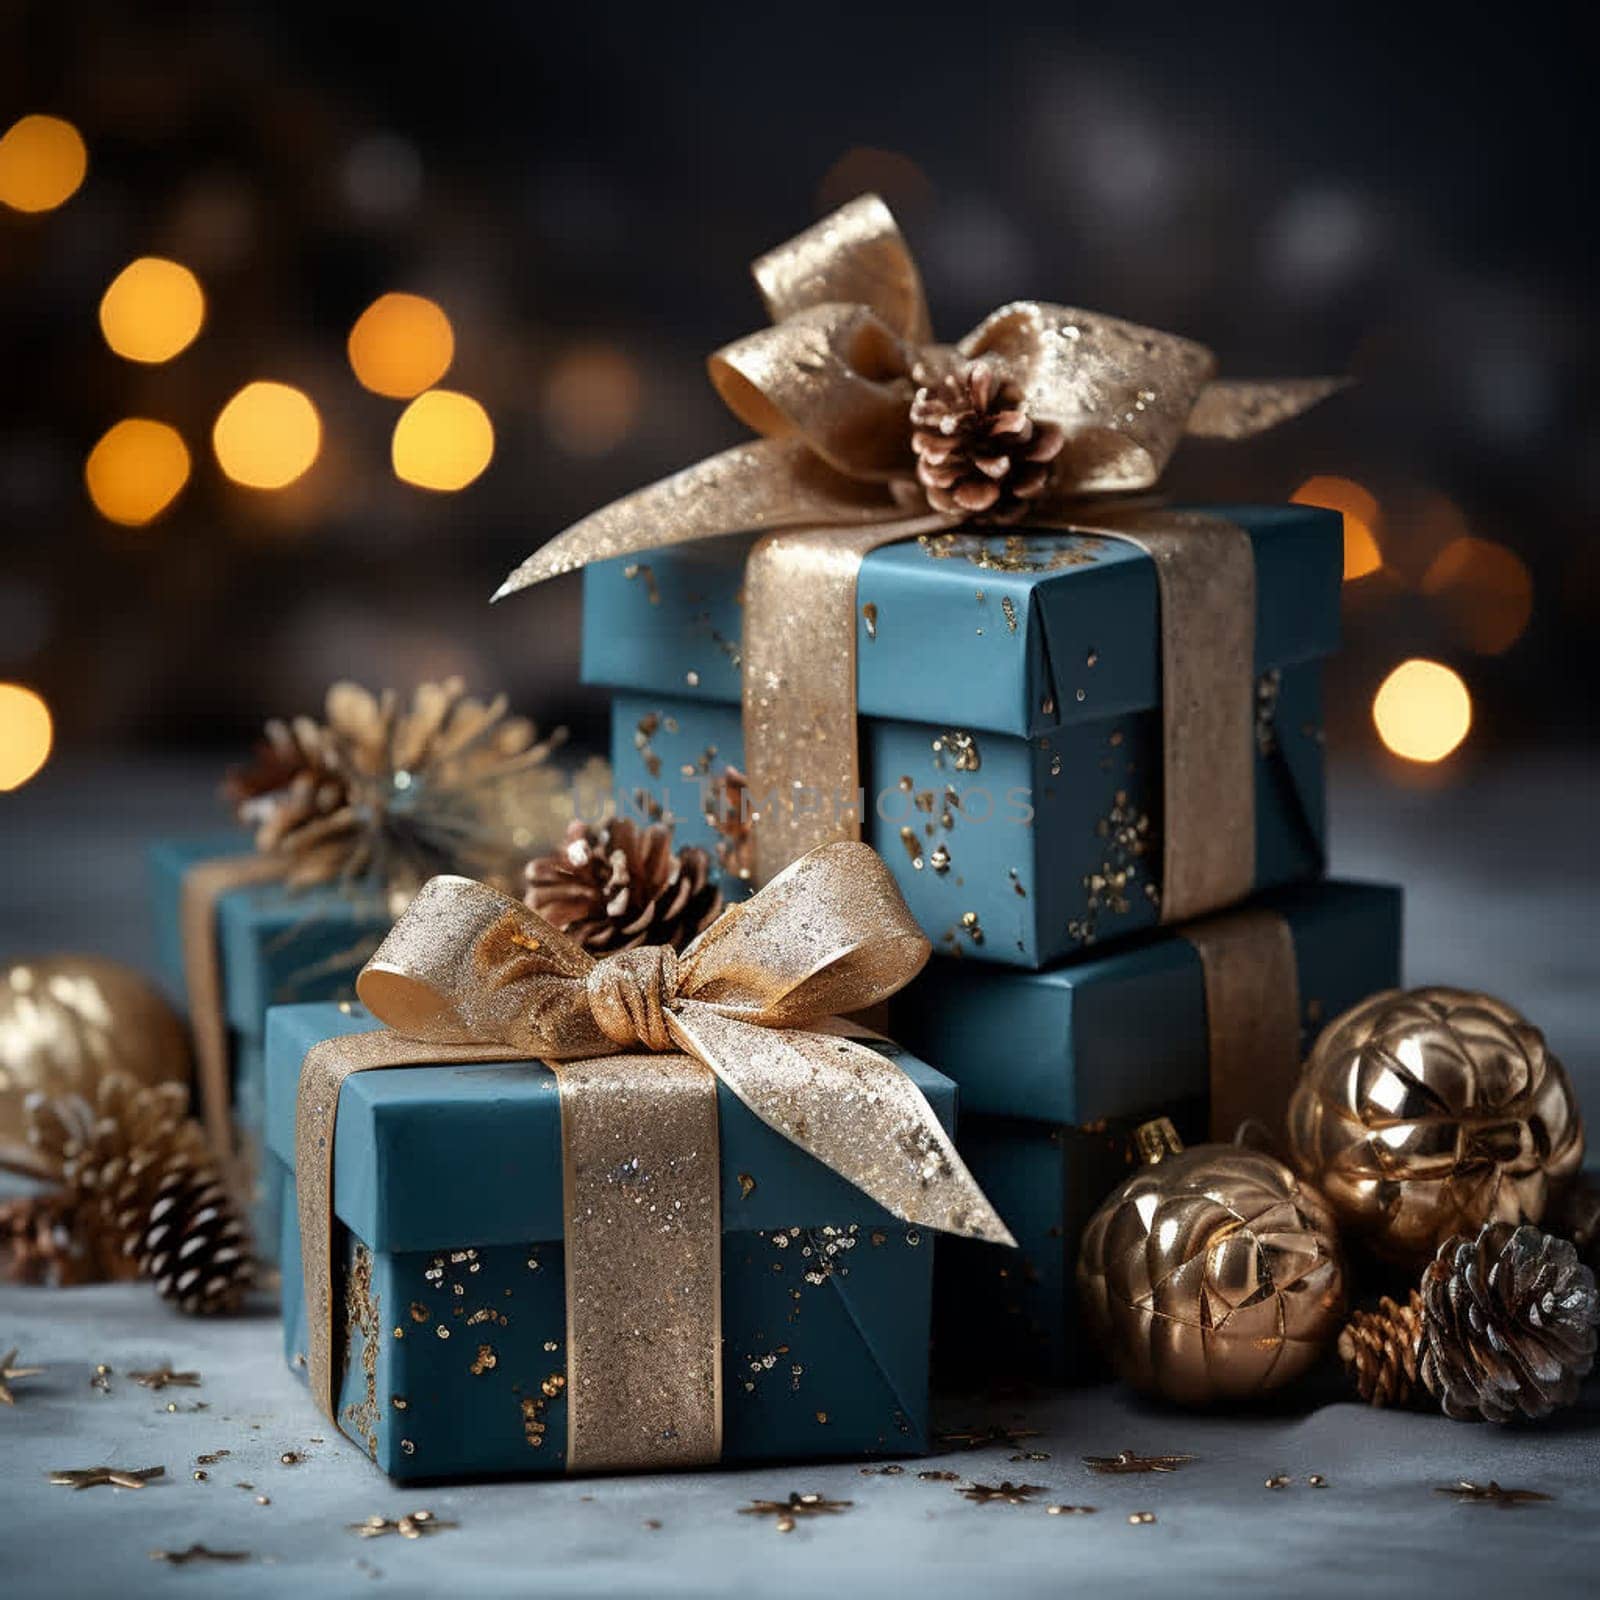 Christmas gifts are decorated in blue and gold by ekaterinabyuksel